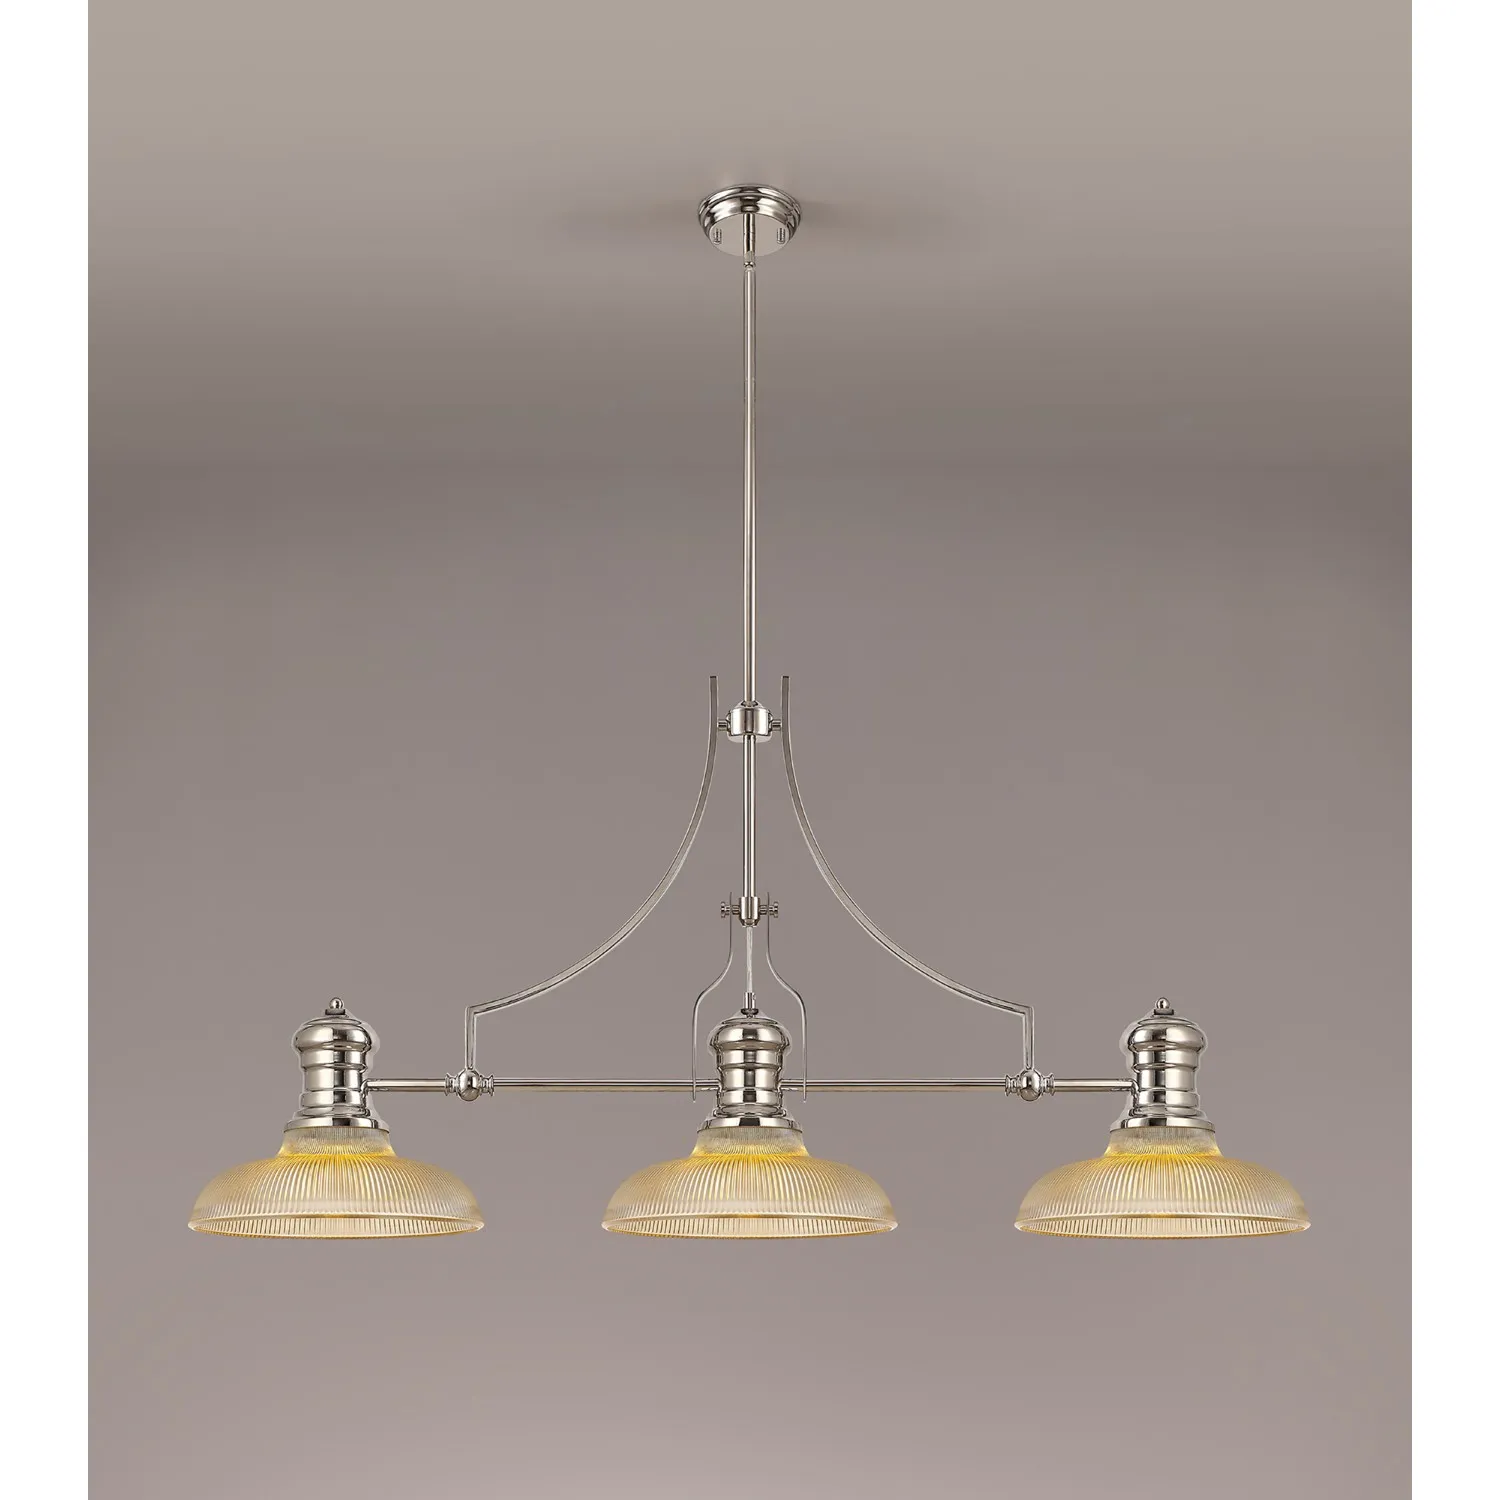 Sandy 3 Light Linear Pendant E27 With 30cm Round Glass Shade, Polished Nickel, Amber